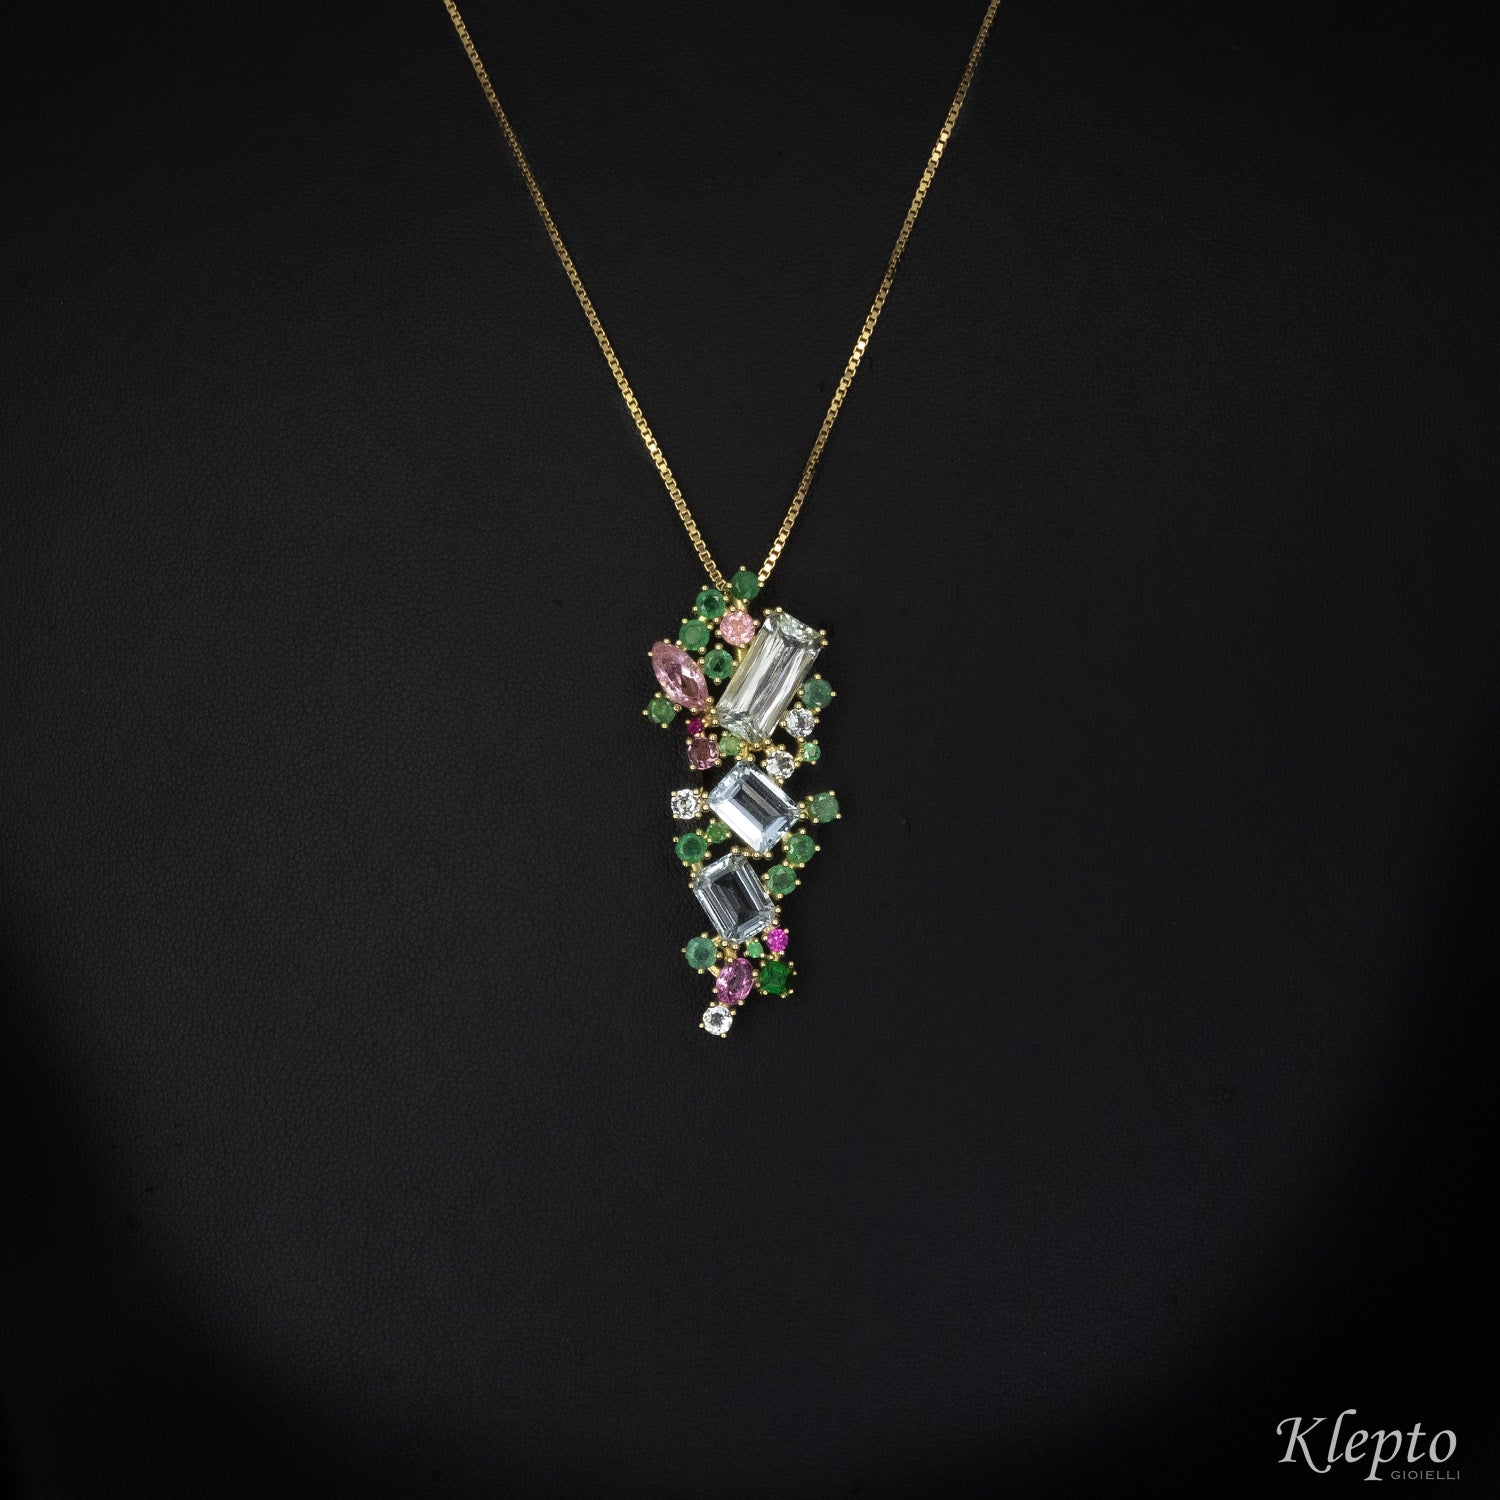 Yellow gold pendant with aquamarines, emeralds and pink tourmalines